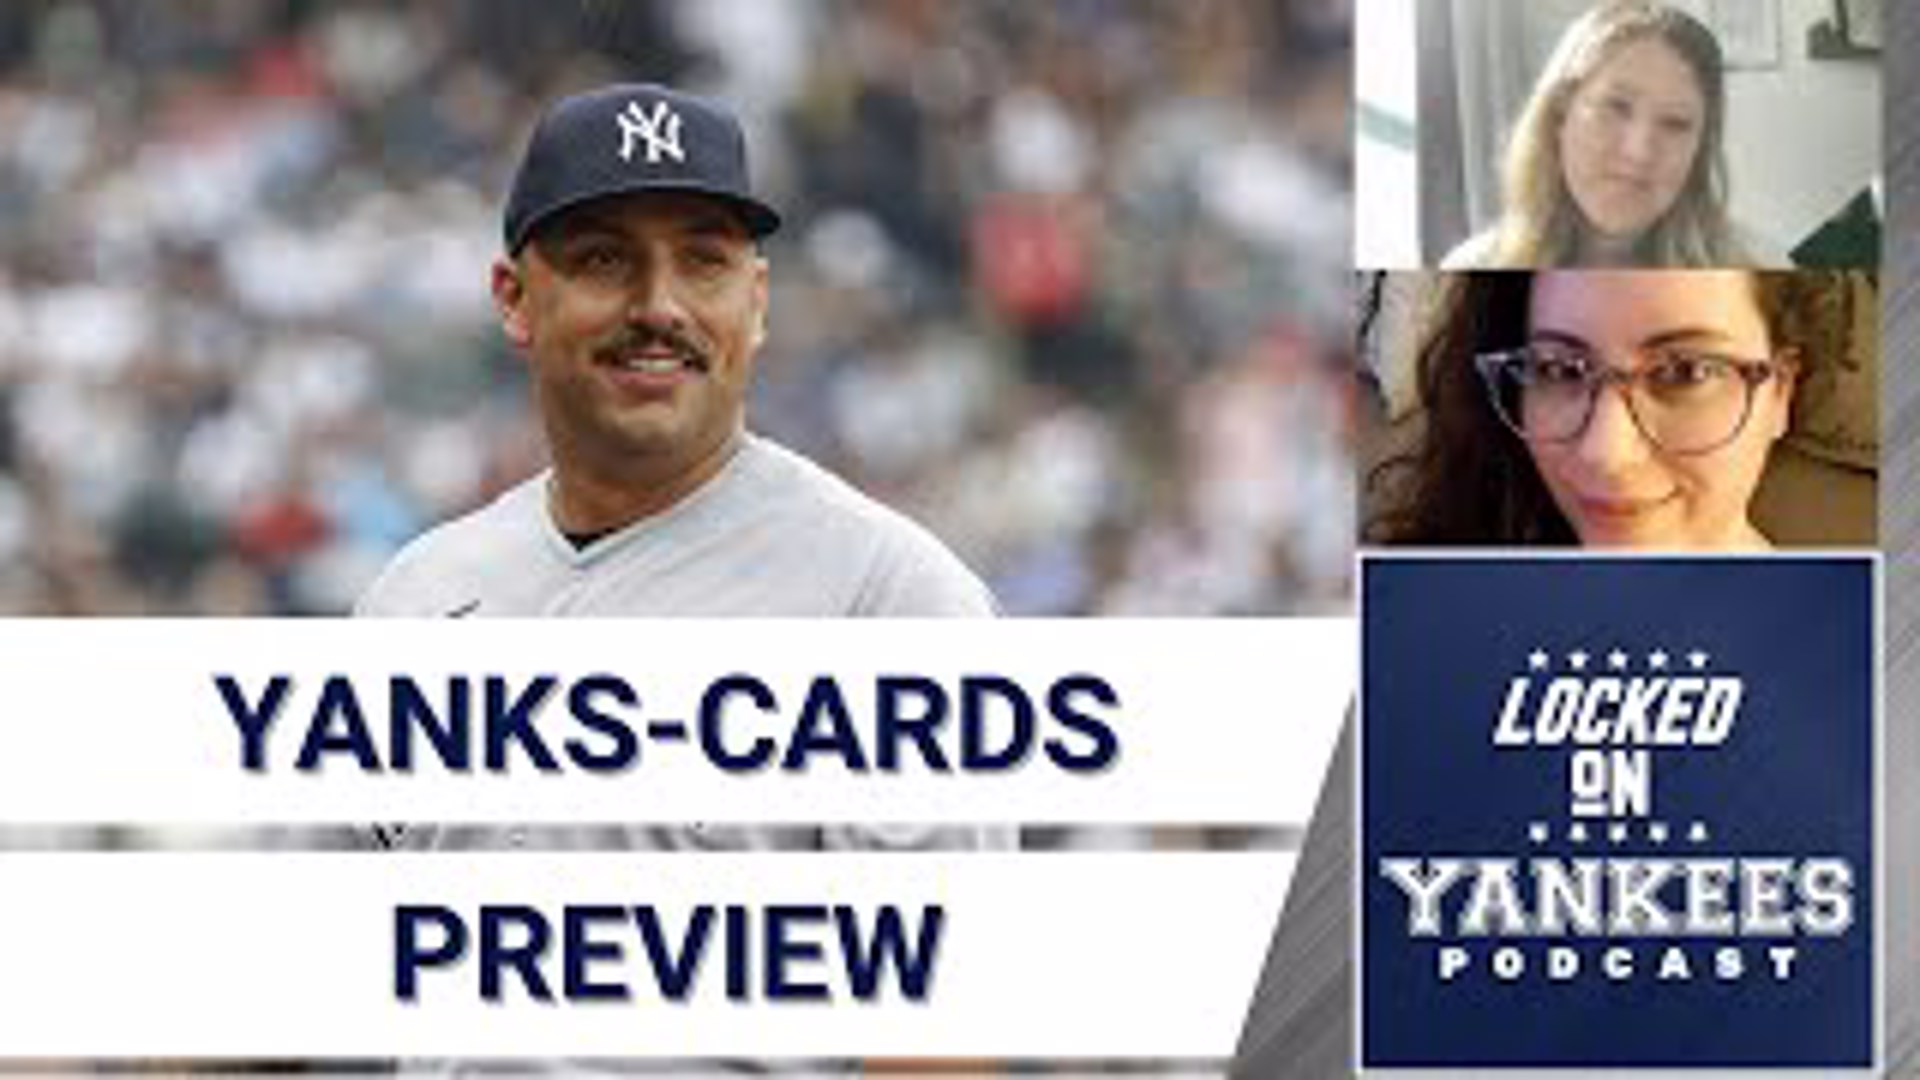 The Yankees are in St. Louis to face the Cardinals and ex-Yankee Jordan Montgomery. Abbey and Stacey talk about the matchups and the storylines on Locked On Yankees.